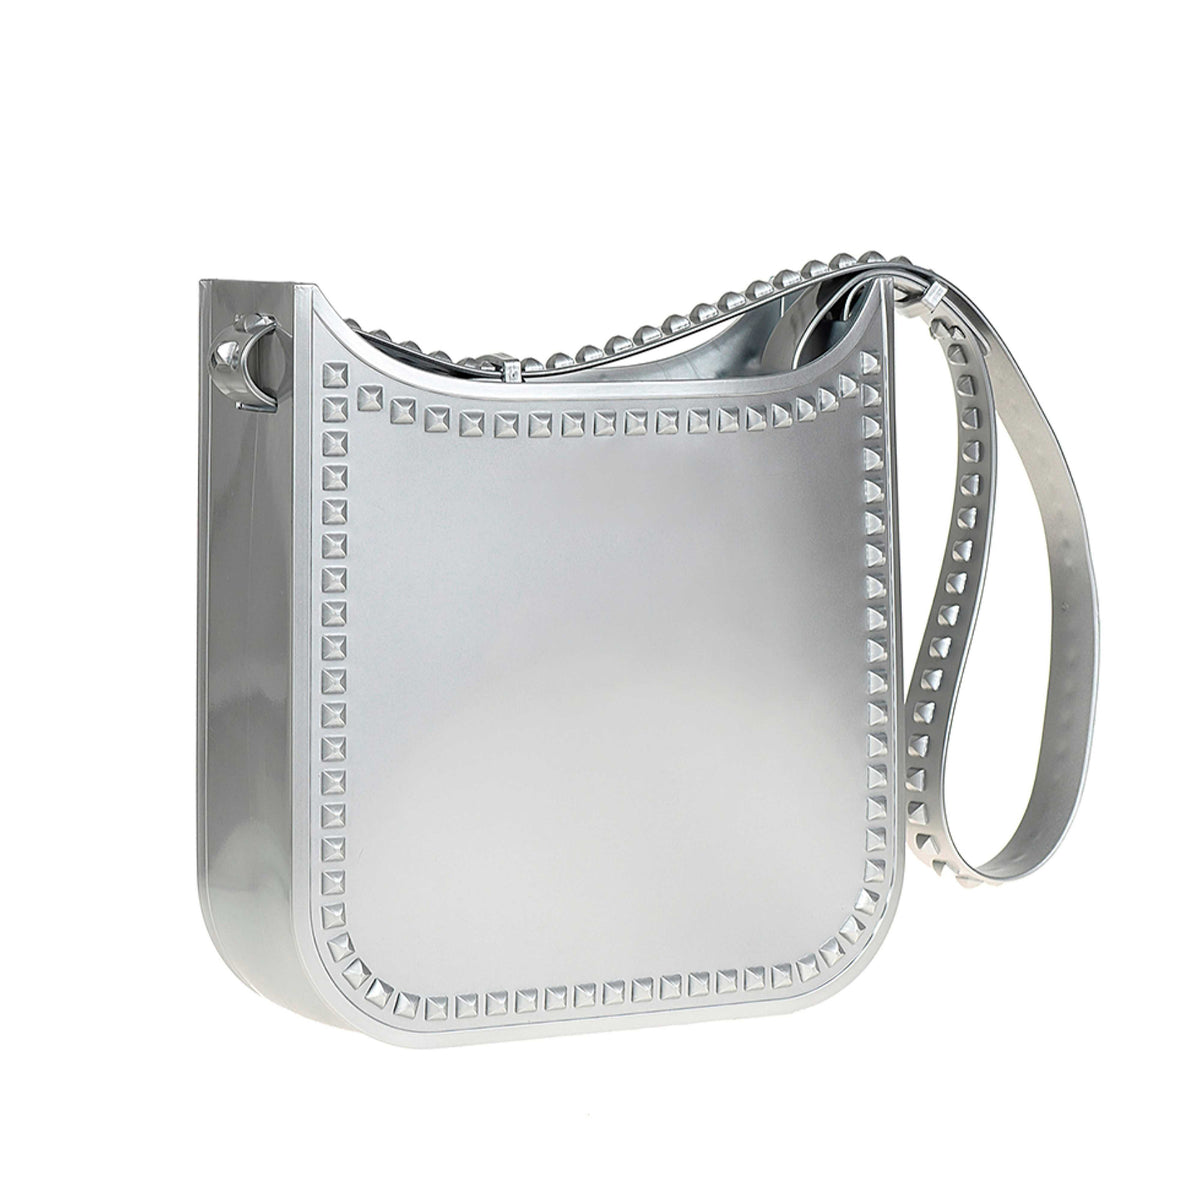 jelly tote beach bag in silver with studded design